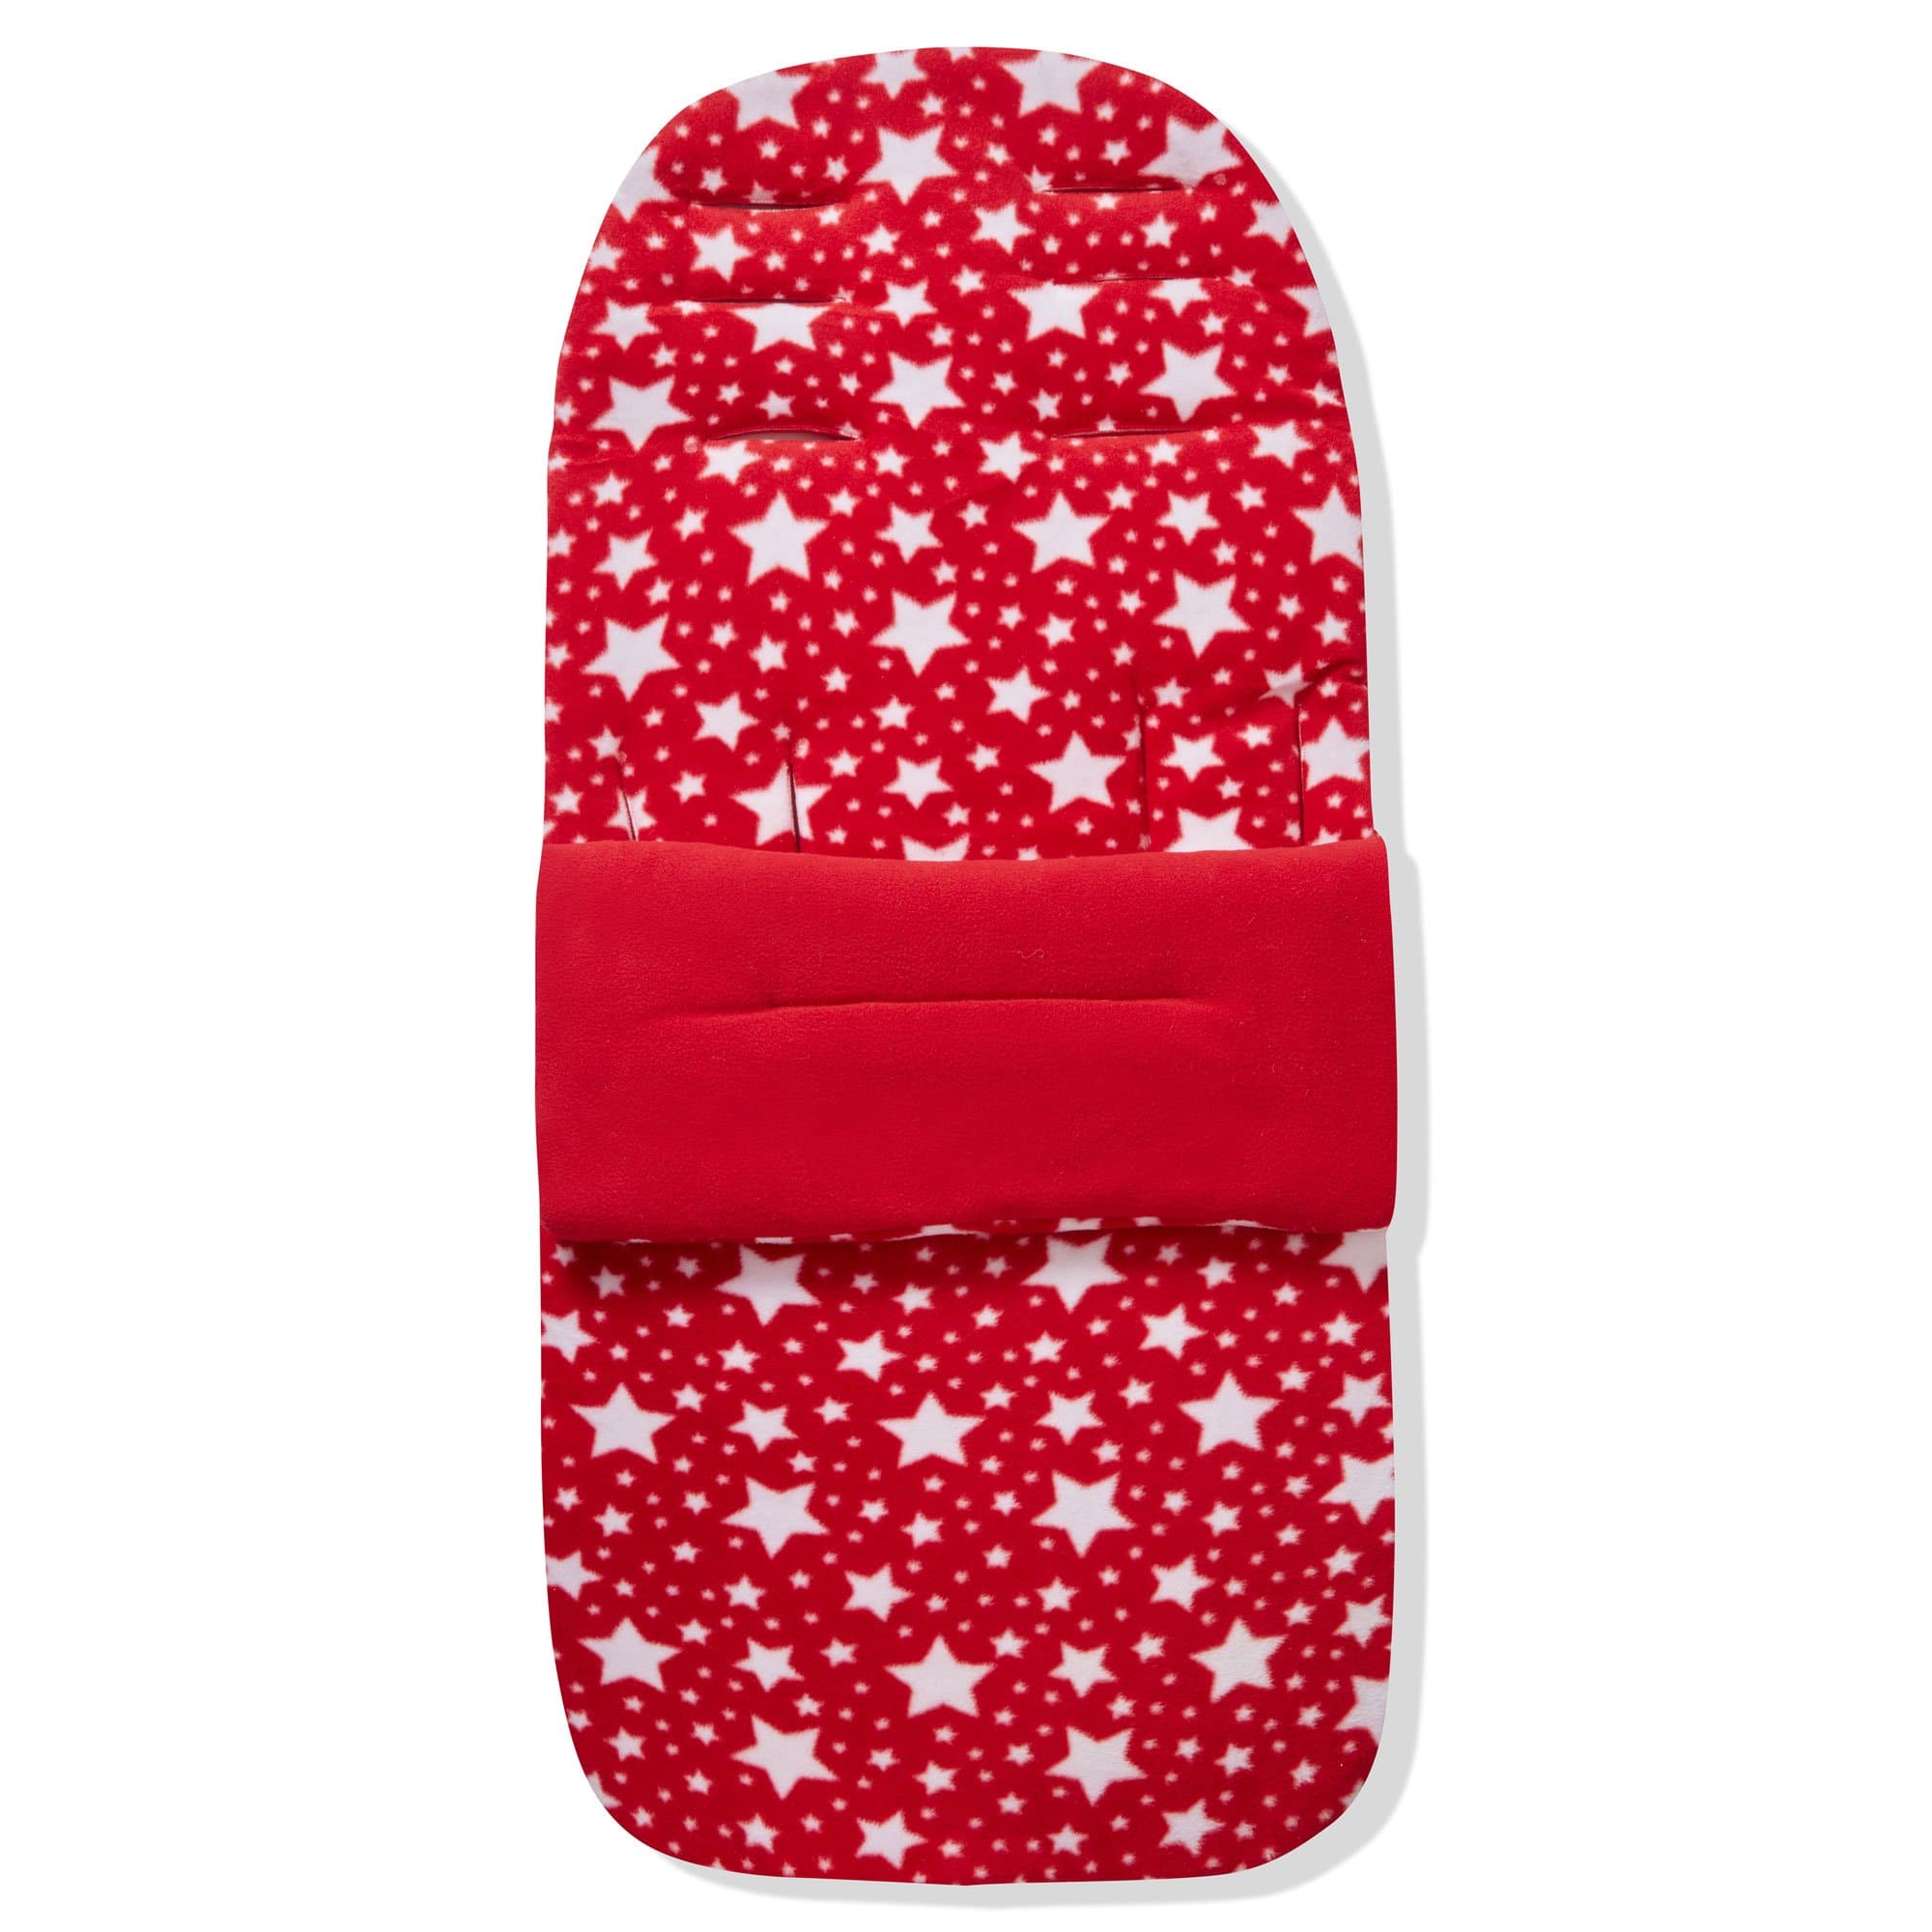 Fleece Footmuff / Cosy Toes Compatible With Brevi - Red Star / Fits All Models | For Your Little One